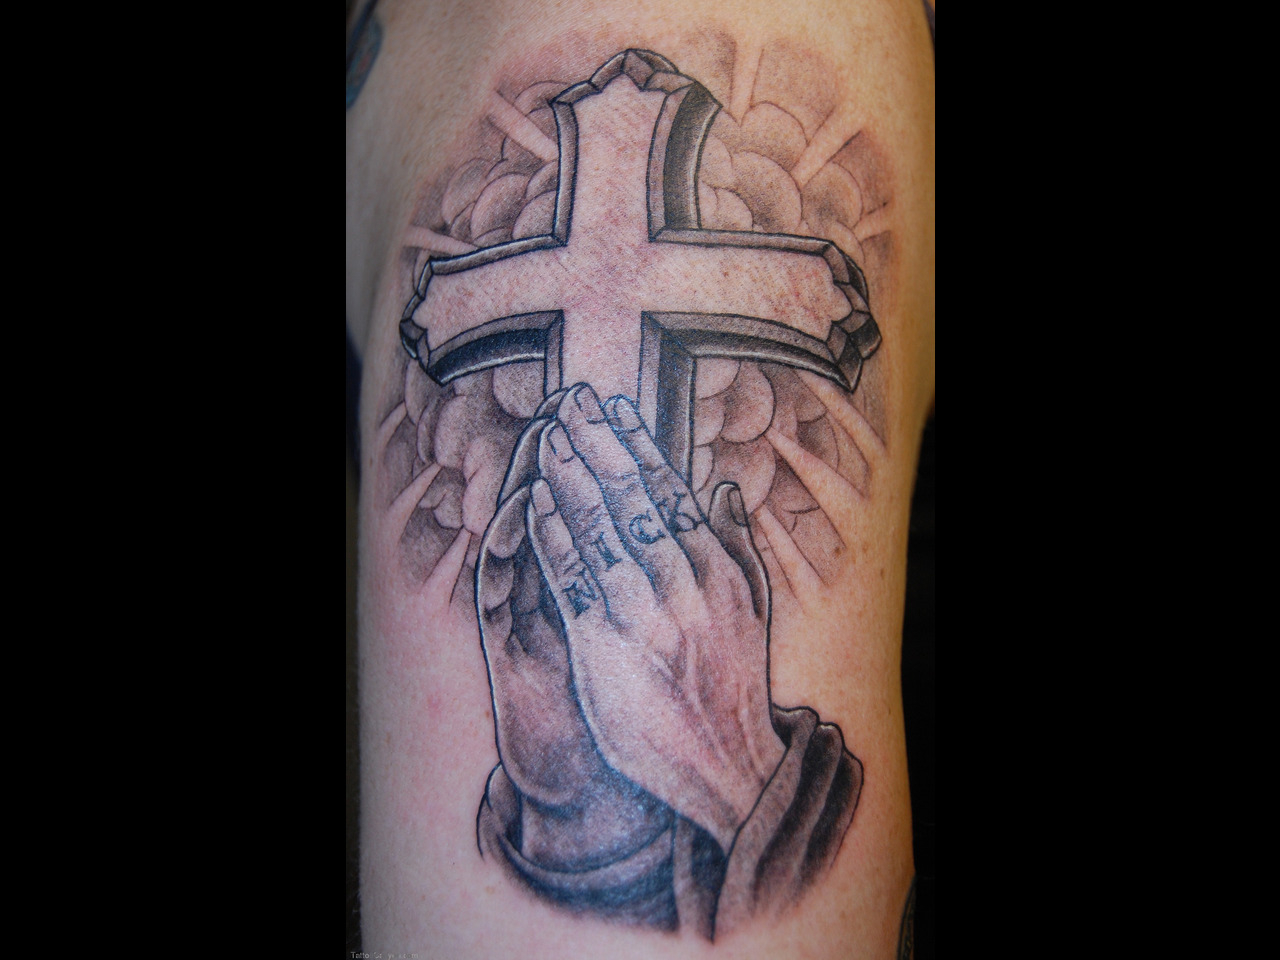 Hand Background Tattoo For Crosses Design Idea within dimensions 1280 X 960